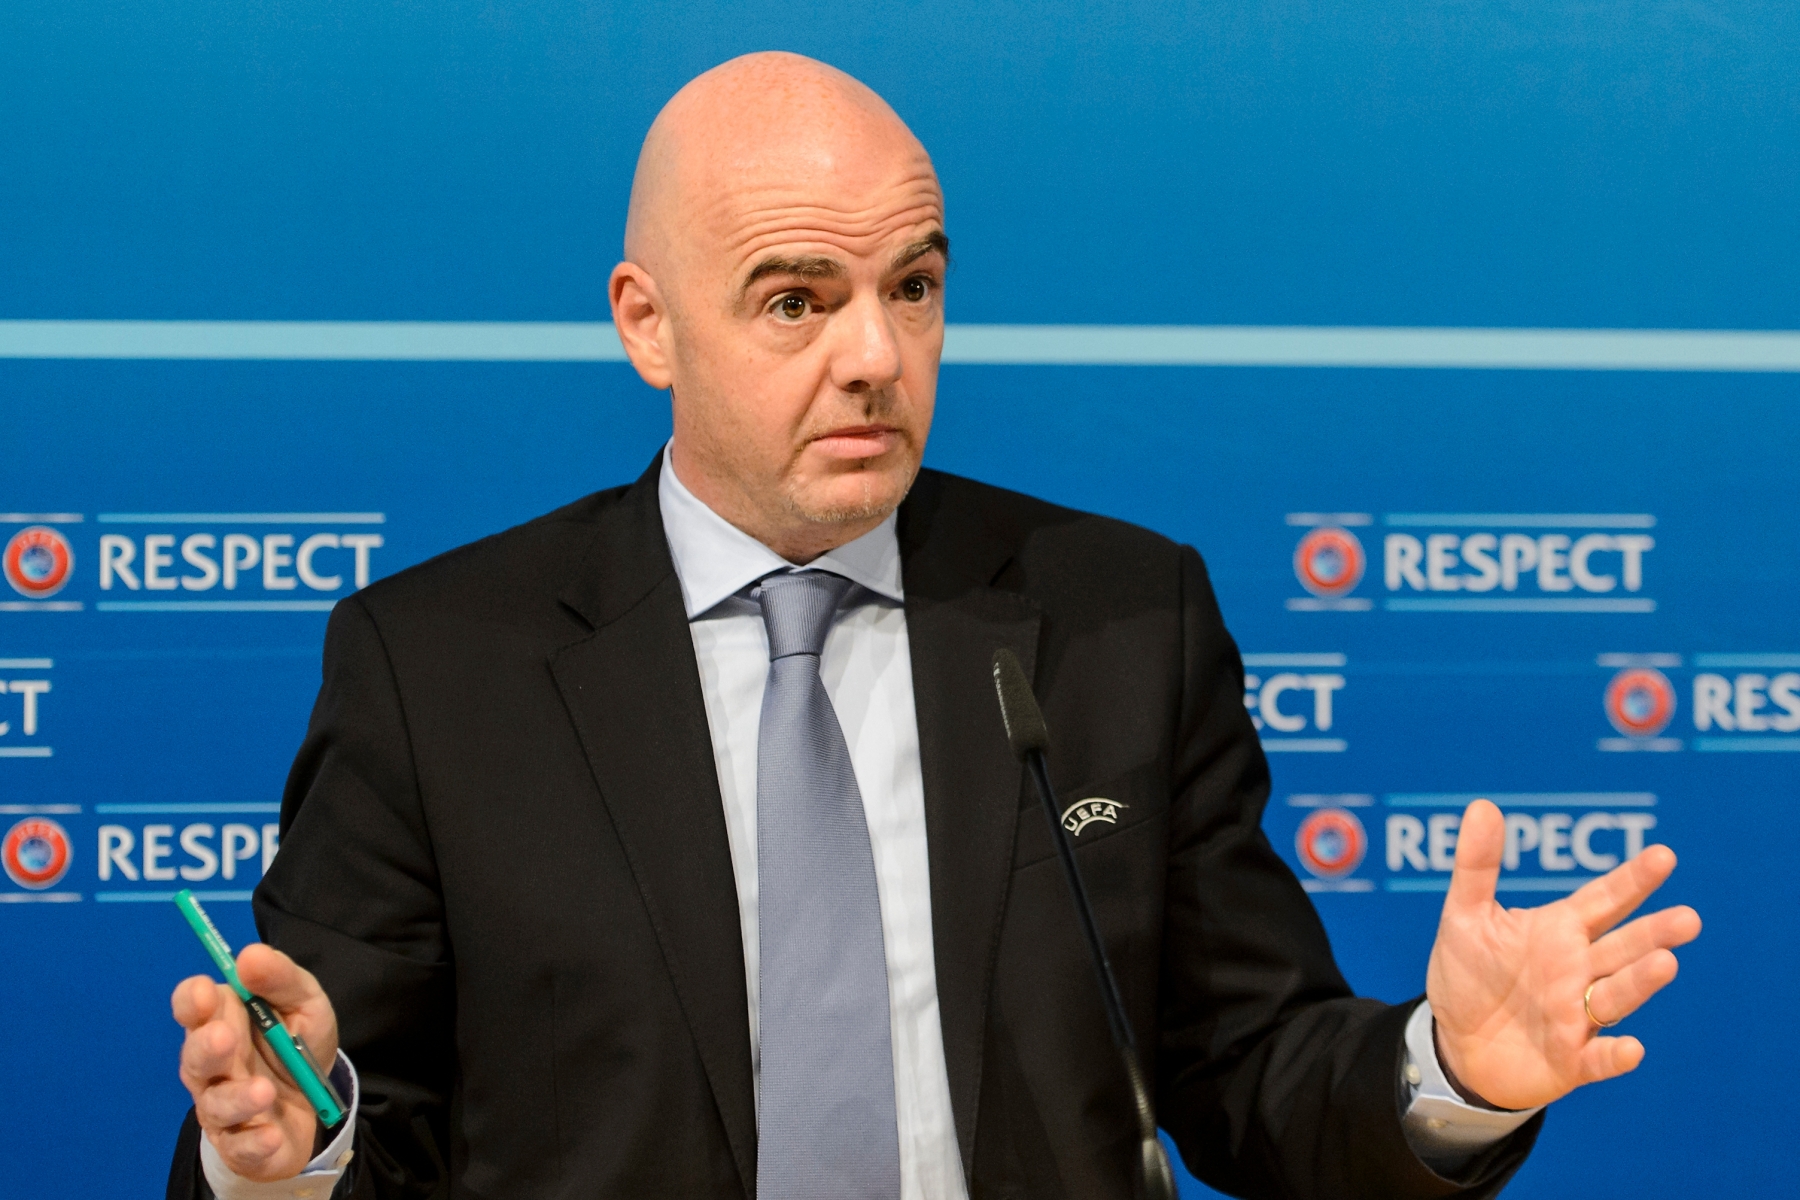 UEFA General Secretary Gianni Infantino speaks during a press conference after the meeting of the UEFA Executive Committee and the meeting of UEFA's 54 member associations, at the UEFA Headquarters, in Nyon, Switzerland, October, Thursday, 15, 2015. (KEYSTONE/Jean-Christophe Bott)d SCHWEIZ FUSSBALL UEFA EXEKUTIVKOMITEE